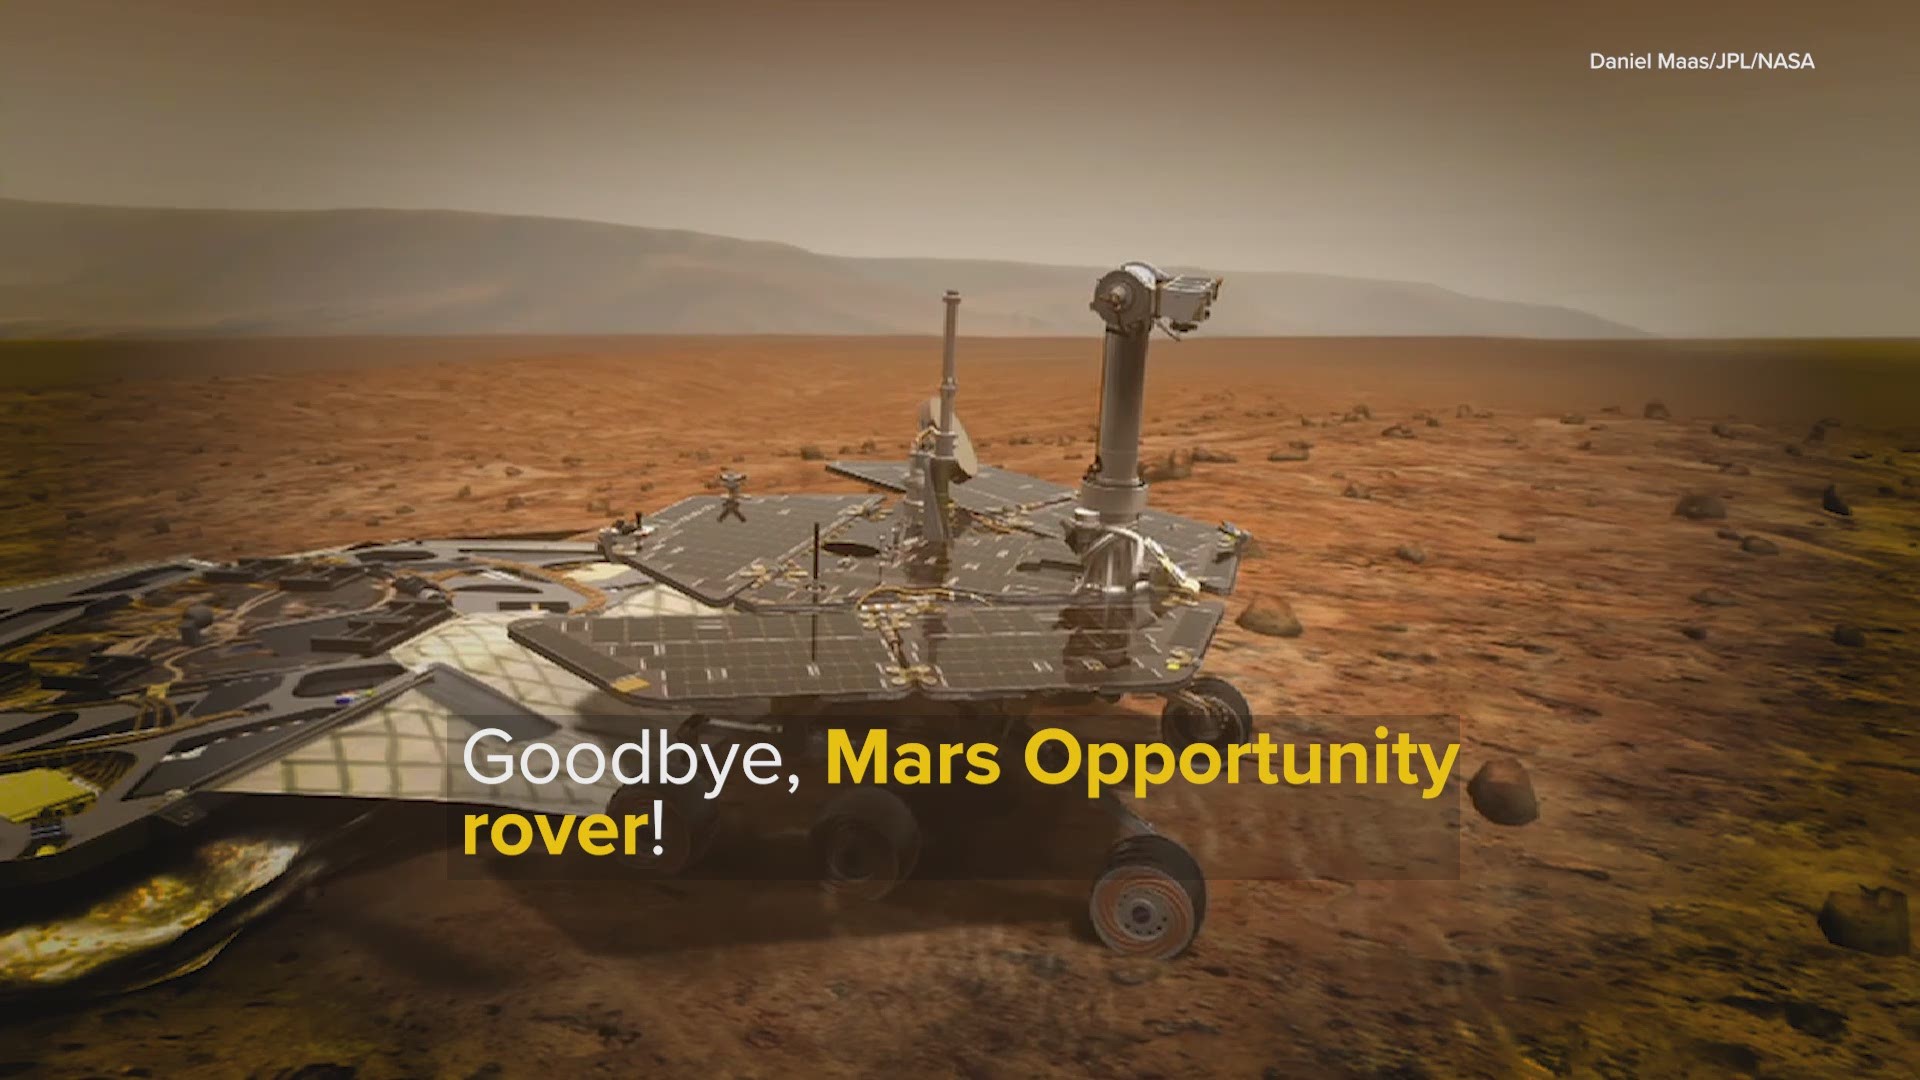 NASA's Opportunity rover was pronounced dead Wednesday, 15 years after it landed on Mars.